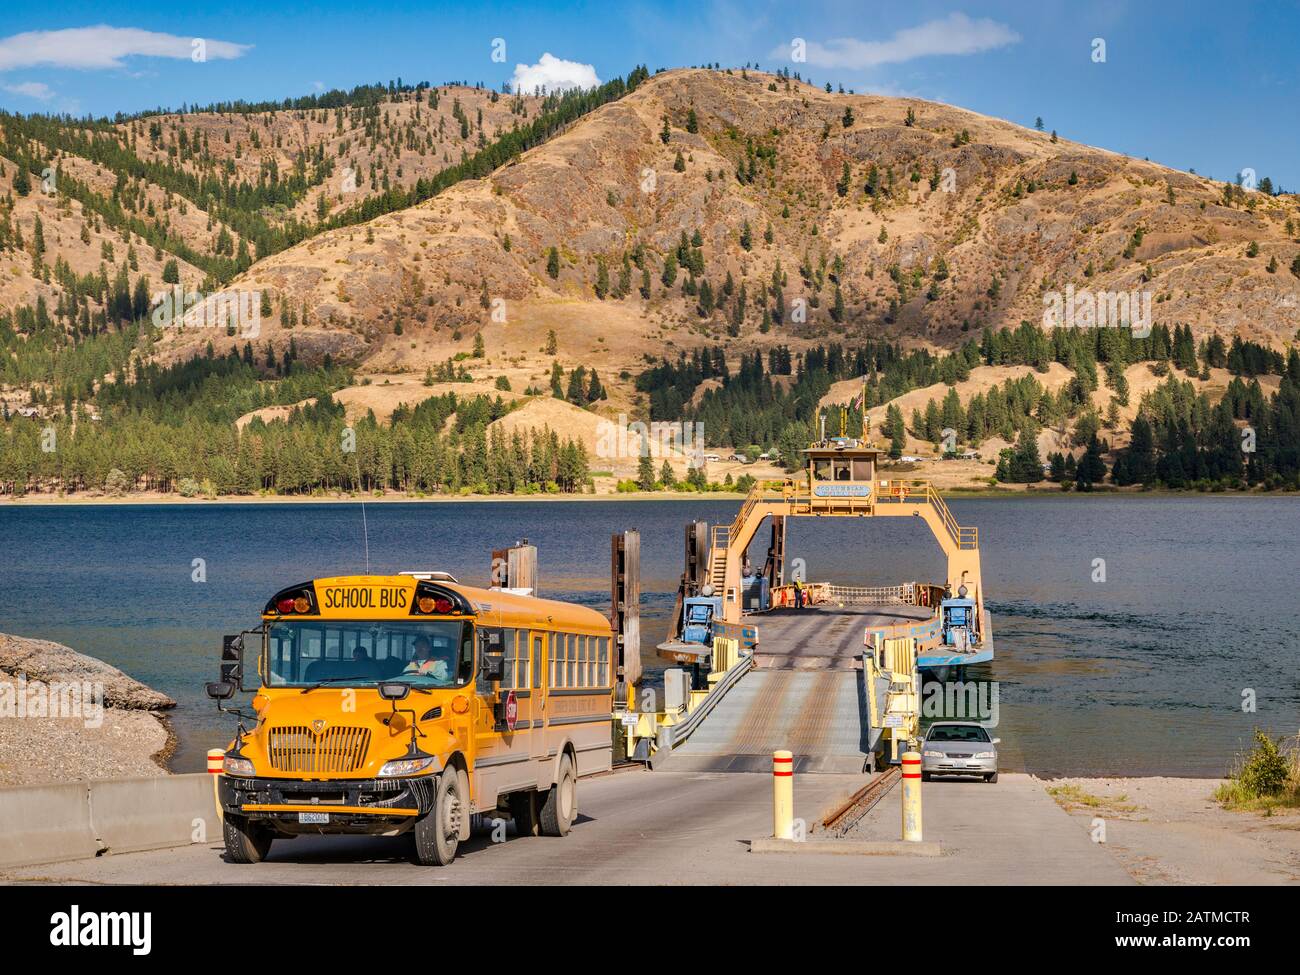 School bus, Columbian Princess Ferry after crossing Franklin D. Roosevelt Lake near Gifford and Inchelium, Lake Roosevelt, Washington state, USA Stock Photo